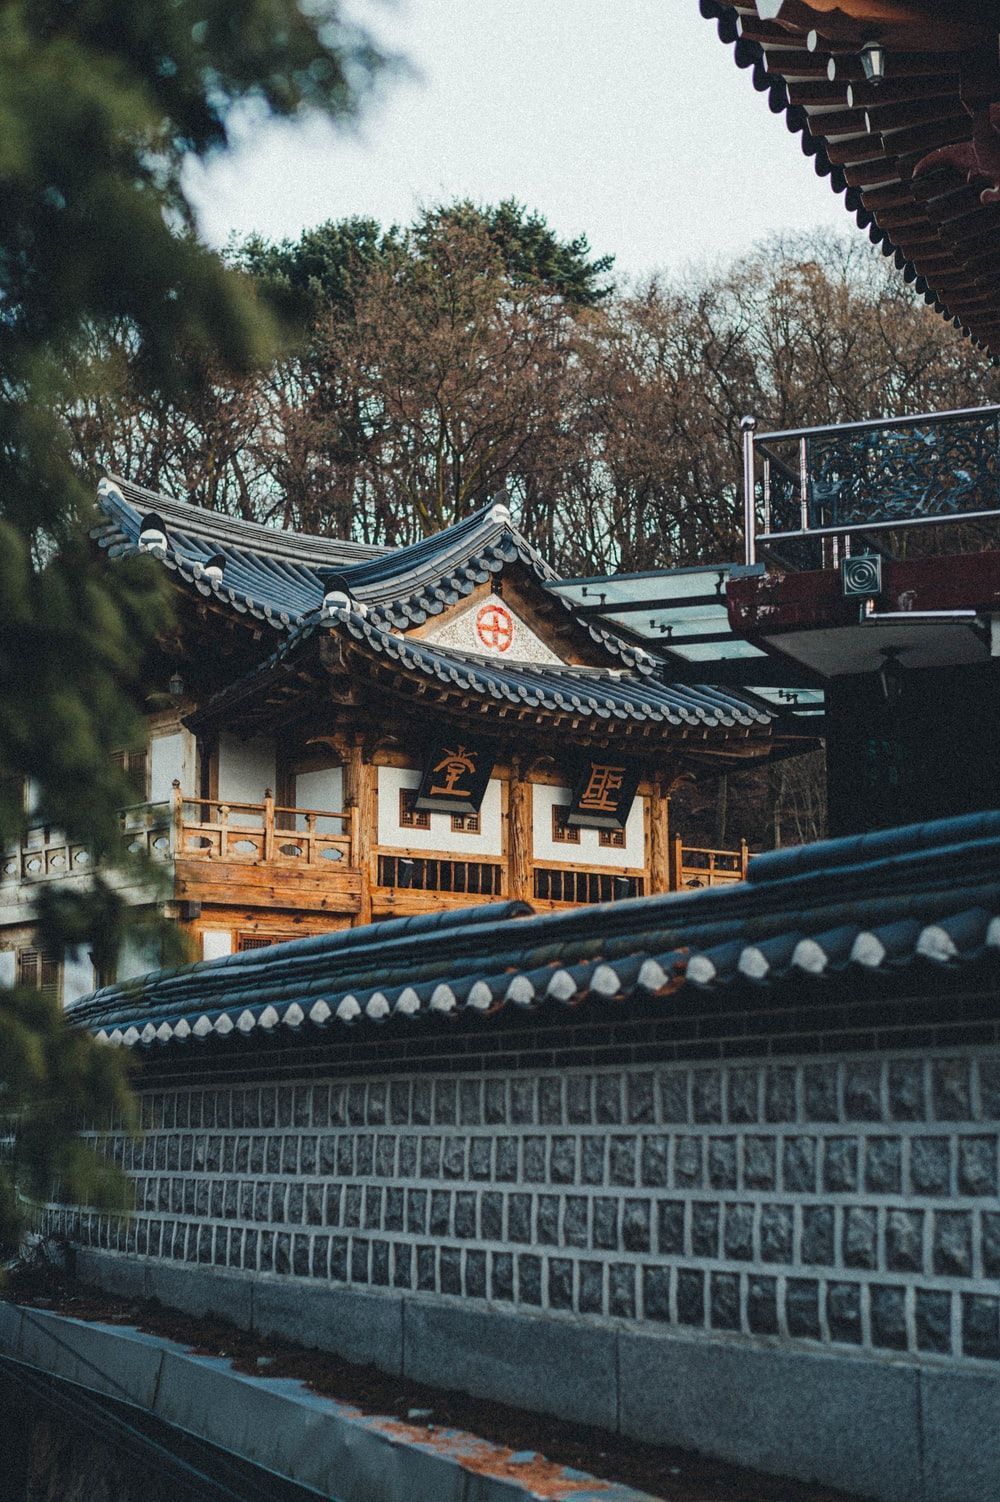 A building with an asian style roof - Seoul